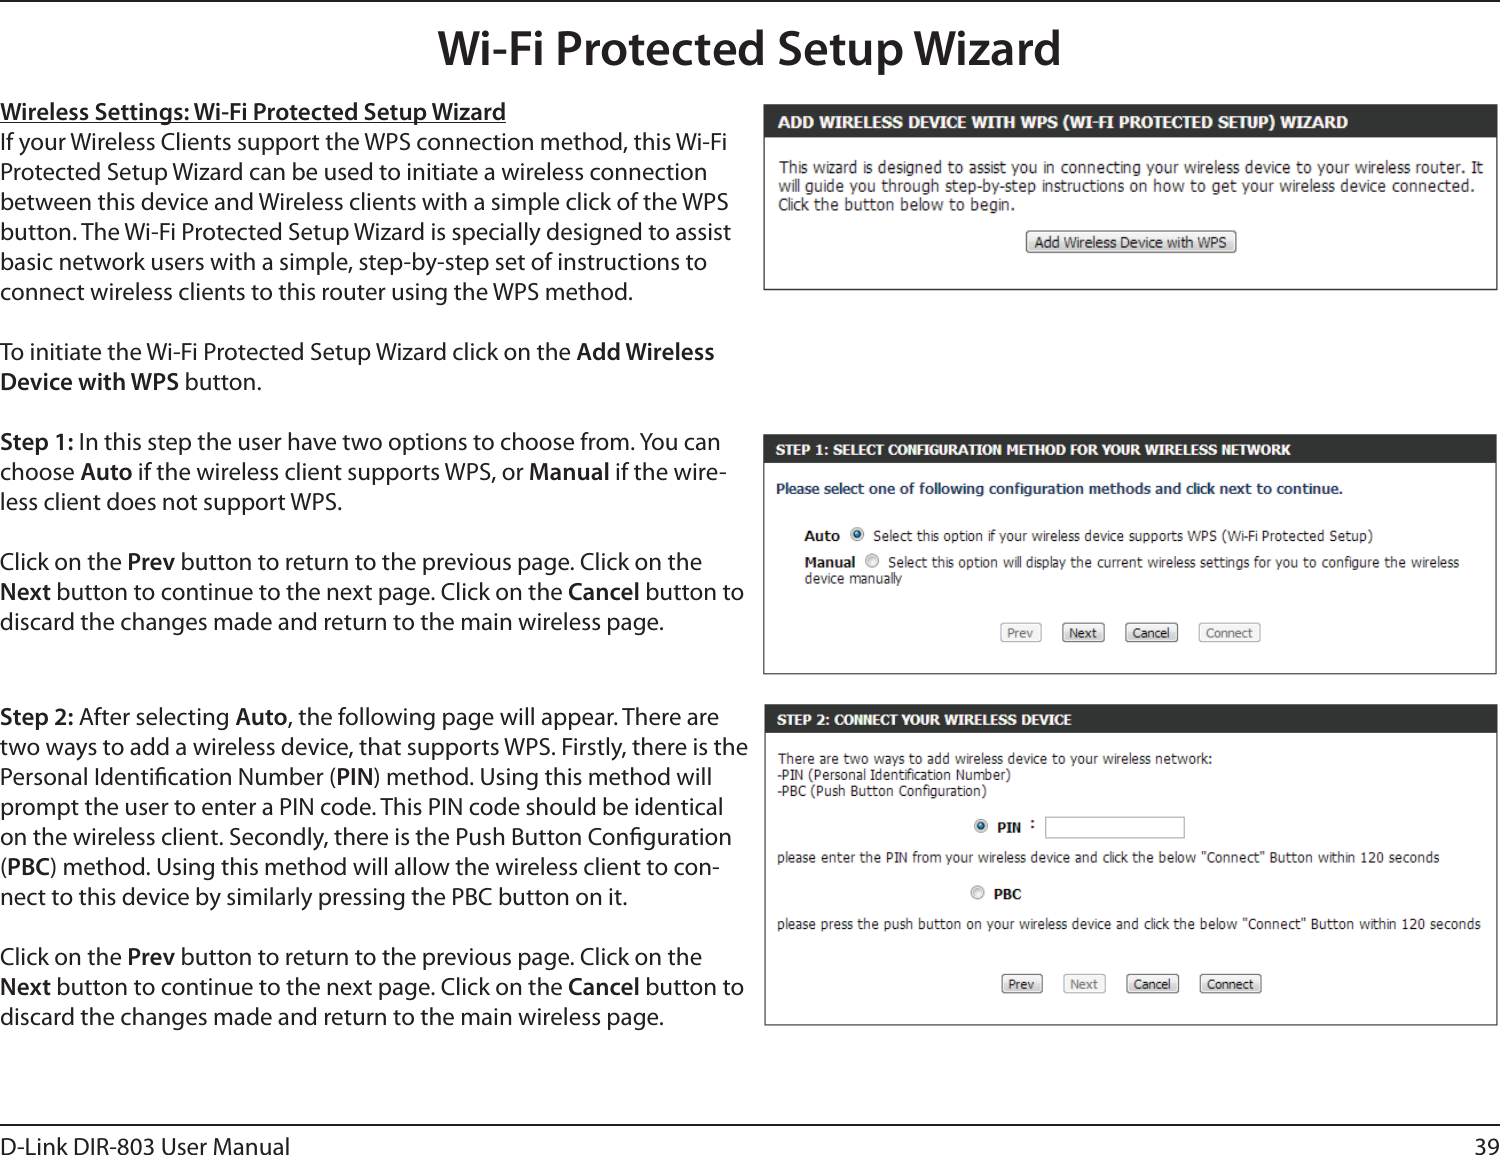 39D-Link DIR-803 User ManualWireless Settings: Wi-Fi Protected Setup WizardIf your Wireless Clients support the WPS connection method, this Wi-Fi Protected Setup Wizard can be used to initiate a wireless connection between this device and Wireless clients with a simple click of the WPS button. The Wi-Fi Protected Setup Wizard is specially designed to assist basic network users with a simple, step-by-step set of instructions to connect wireless clients to this router using the WPS method.To initiate the Wi-Fi Protected Setup Wizard click on the Add Wireless Device with WPS button.Step 1: In this step the user have two options to choose from. You can choose Auto if the wireless client supports WPS, or Manual if the wire-less client does not support WPS.Click on the Prev button to return to the previous page. Click on the Next button to continue to the next page. Click on the Cancel button to discard the changes made and return to the main wireless page.Step 2: After selecting Auto, the following page will appear. There are two ways to add a wireless device, that supports WPS. Firstly, there is the Personal Identication Number (PIN) method. Using this method will prompt the user to enter a PIN code. This PIN code should be identical on the wireless client. Secondly, there is the Push Button Conguration (PBC) method. Using this method will allow the wireless client to con-nect to this device by similarly pressing the PBC button on it.Click on the Prev button to return to the previous page. Click on the Next button to continue to the next page. Click on the Cancel button to discard the changes made and return to the main wireless page.Wi-Fi Protected Setup Wizard